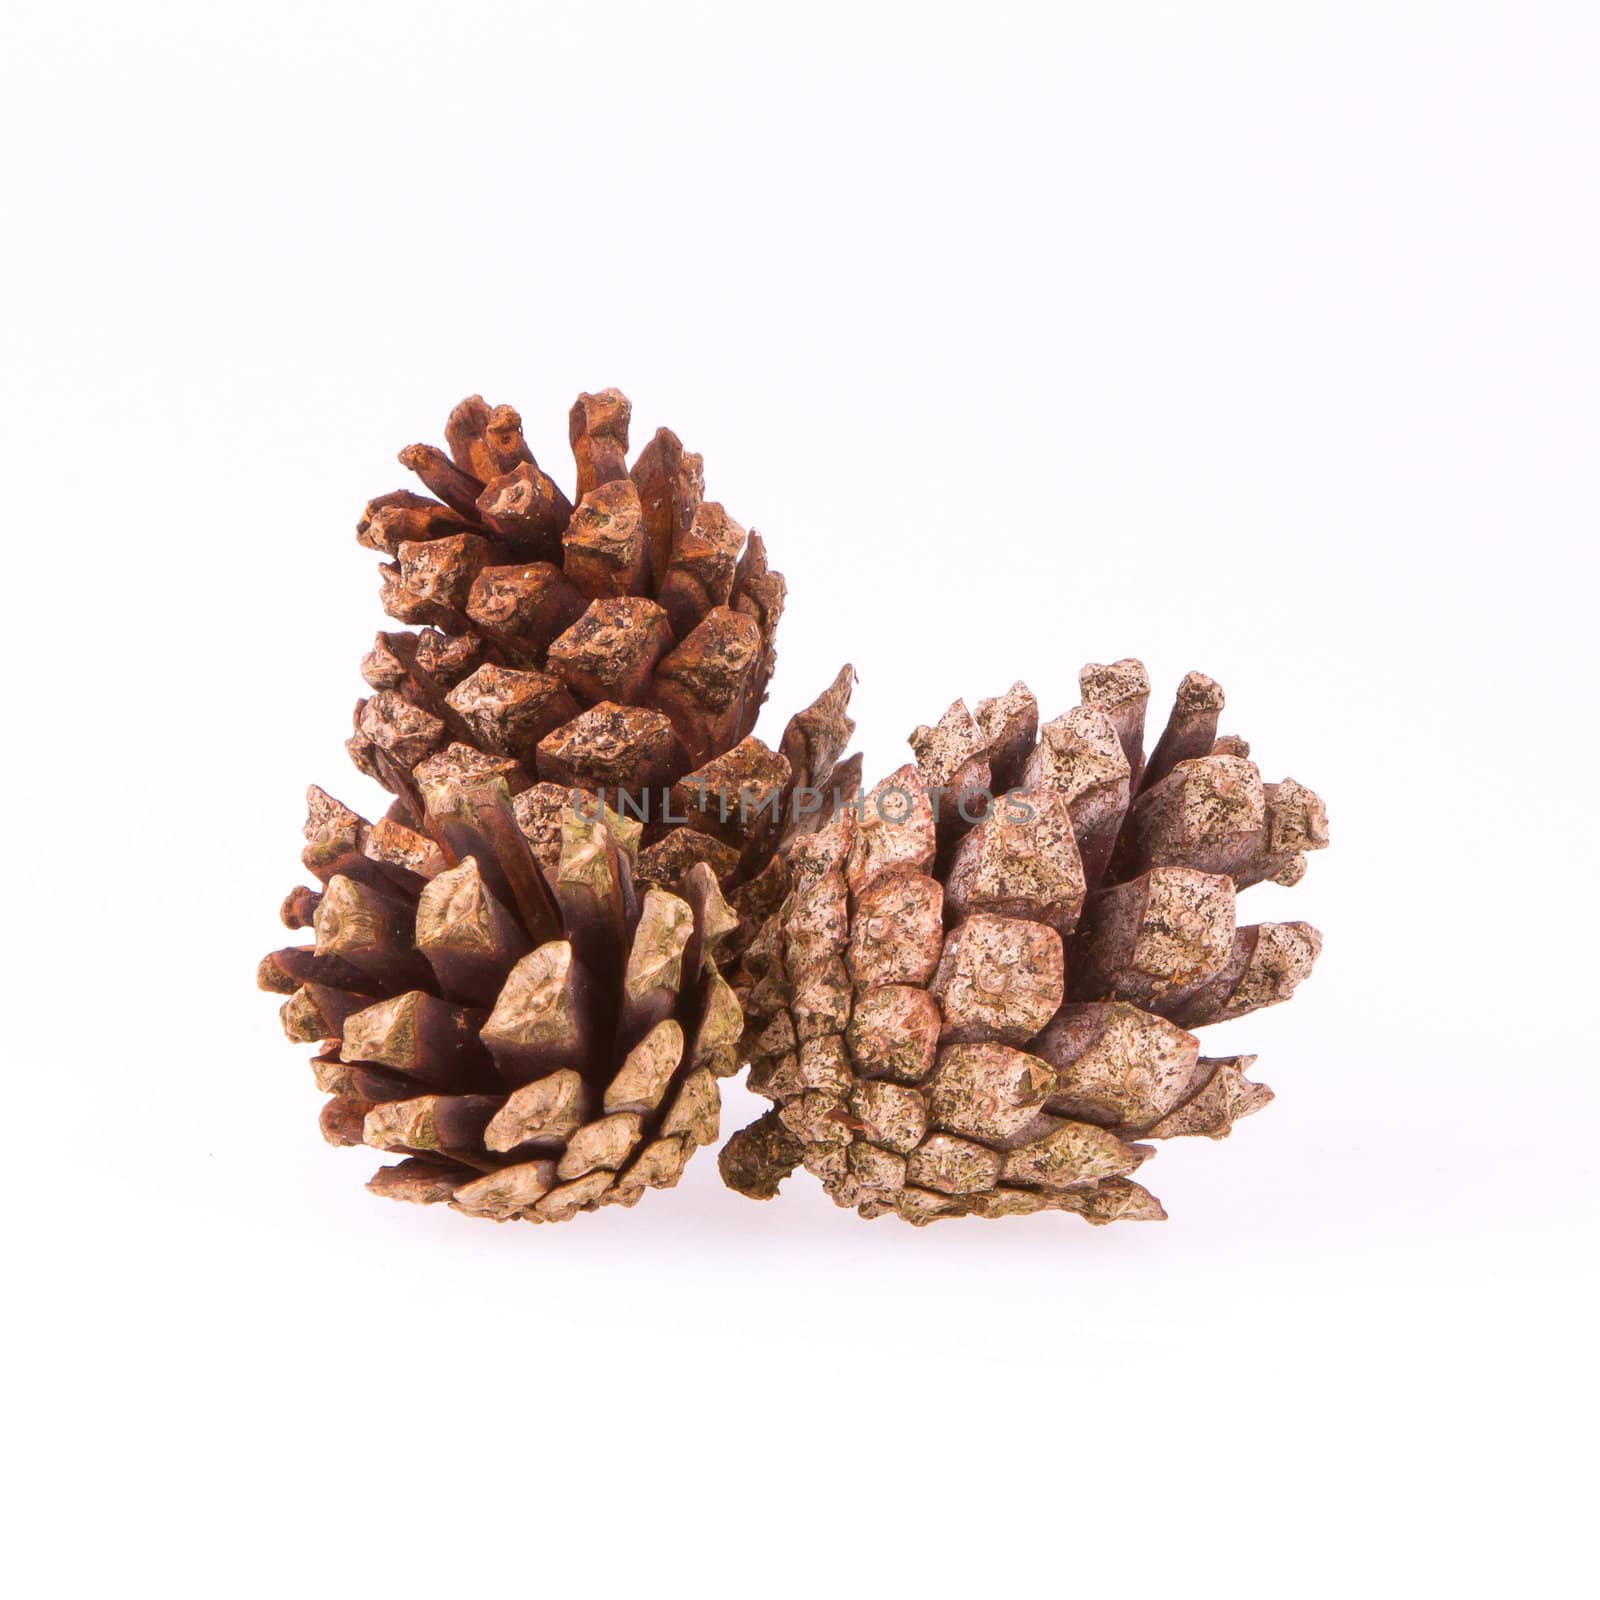 A few pine cones by michaklootwijk